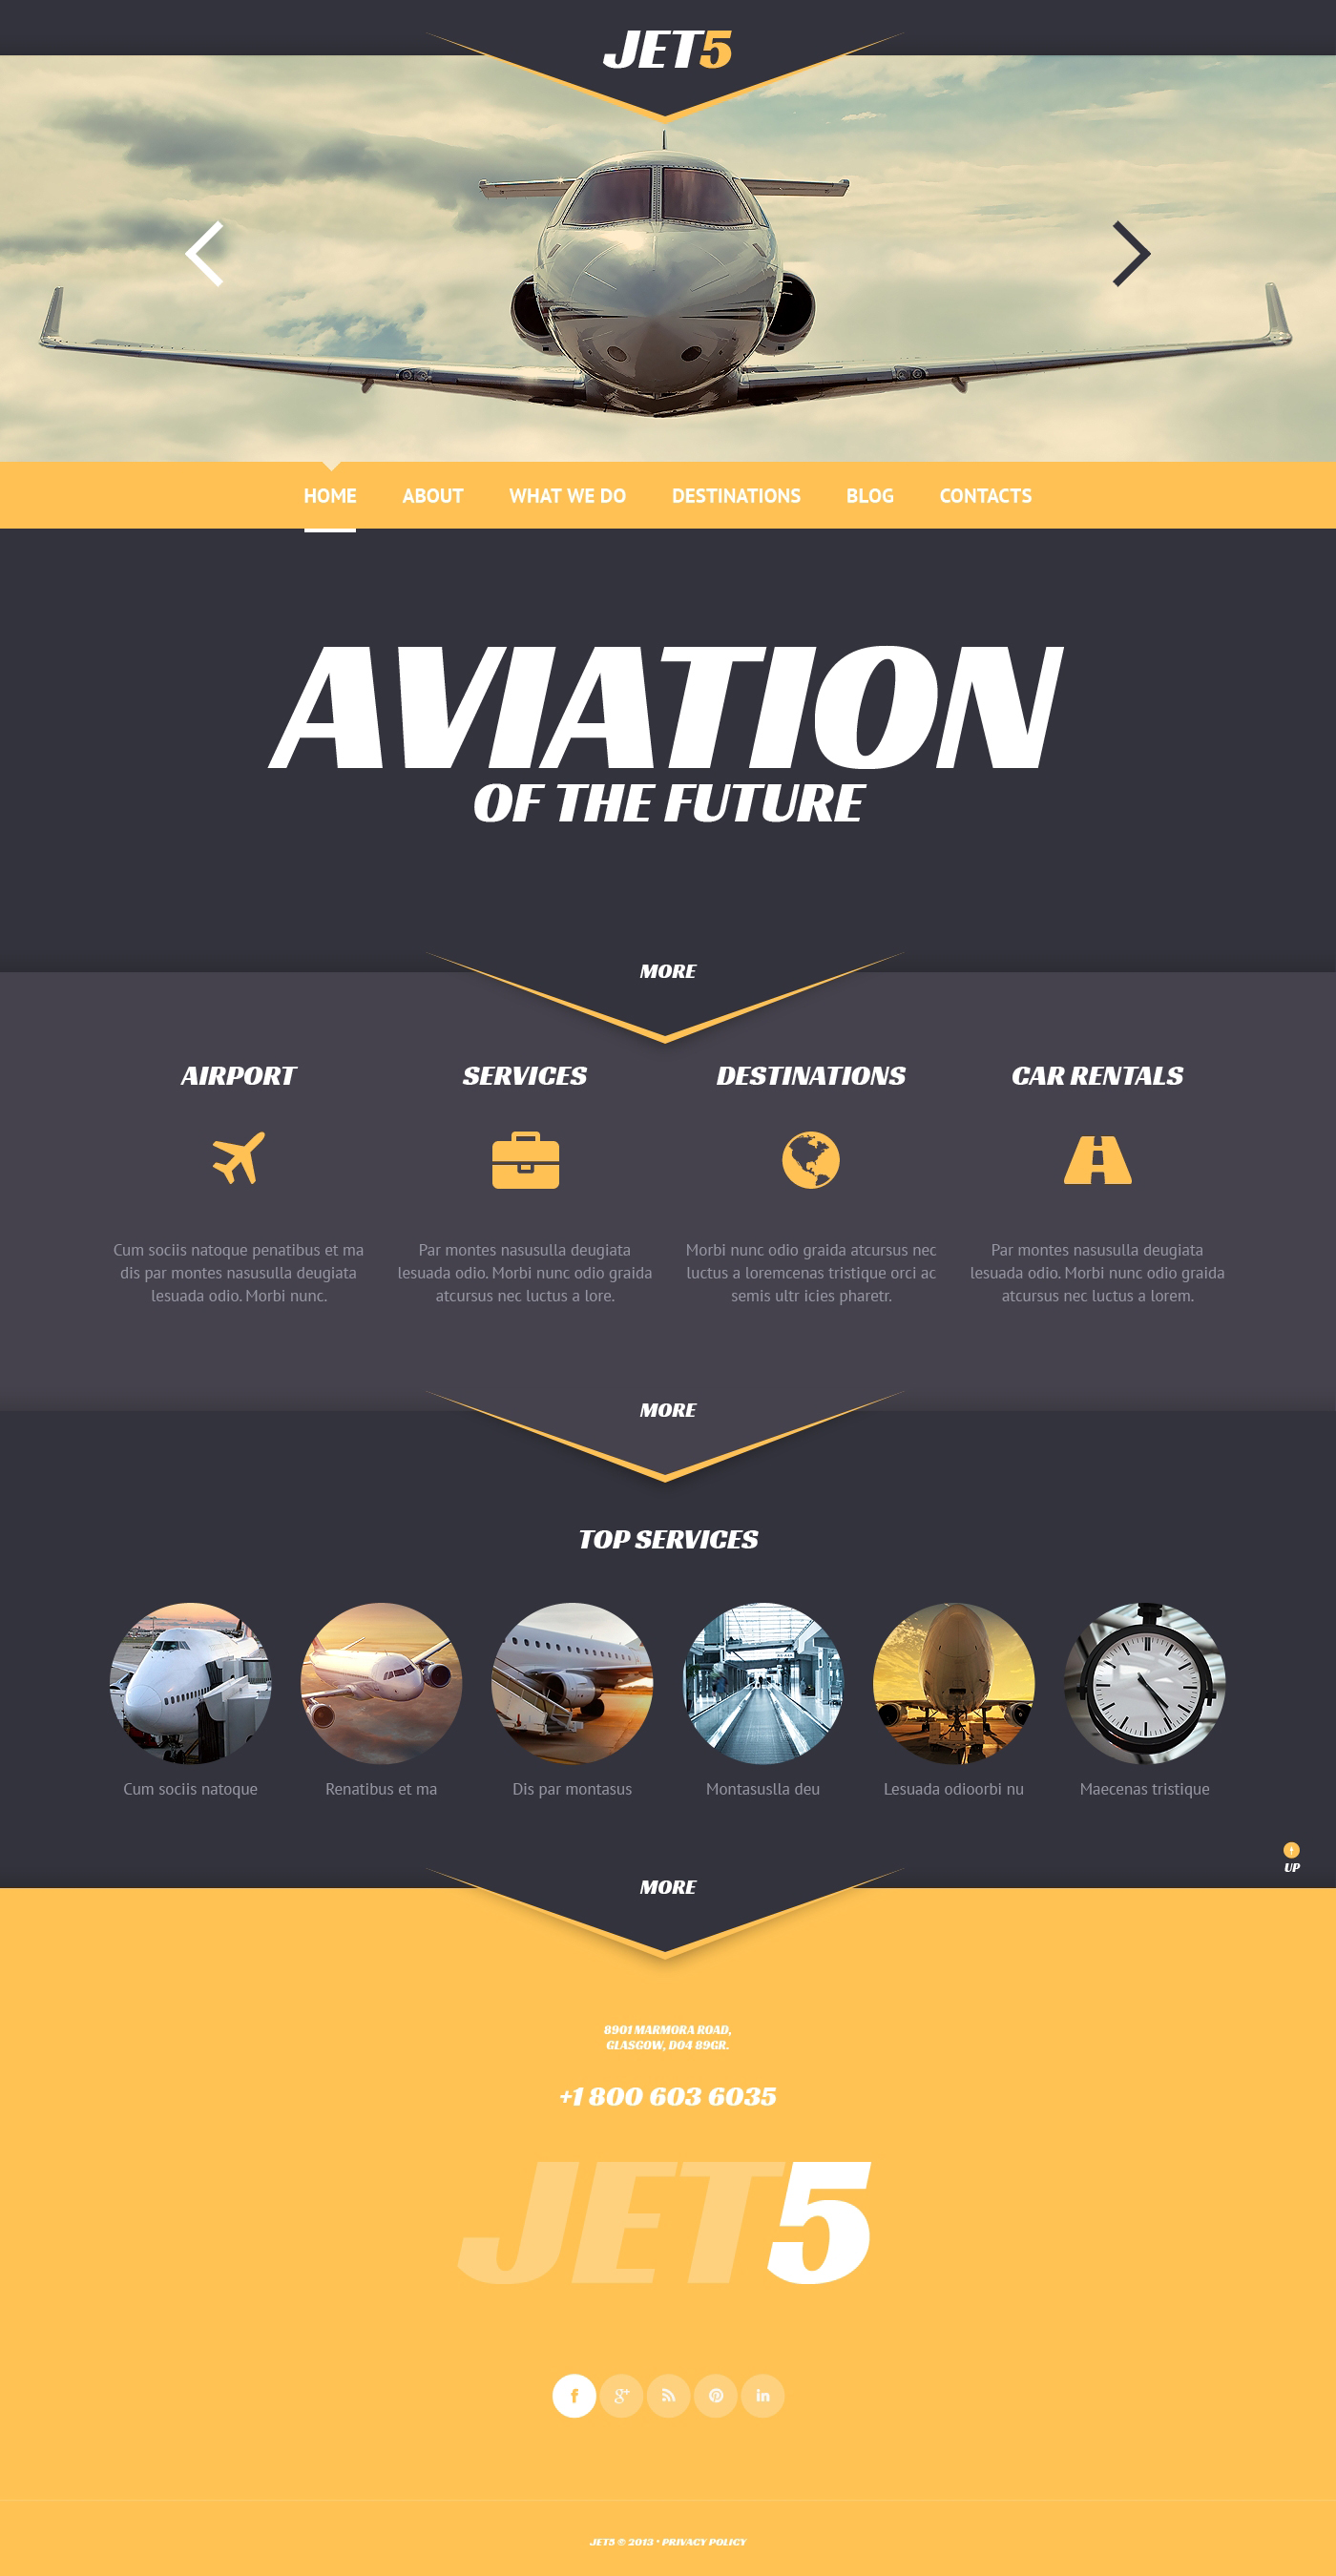 Private Airlines WordPress Theme